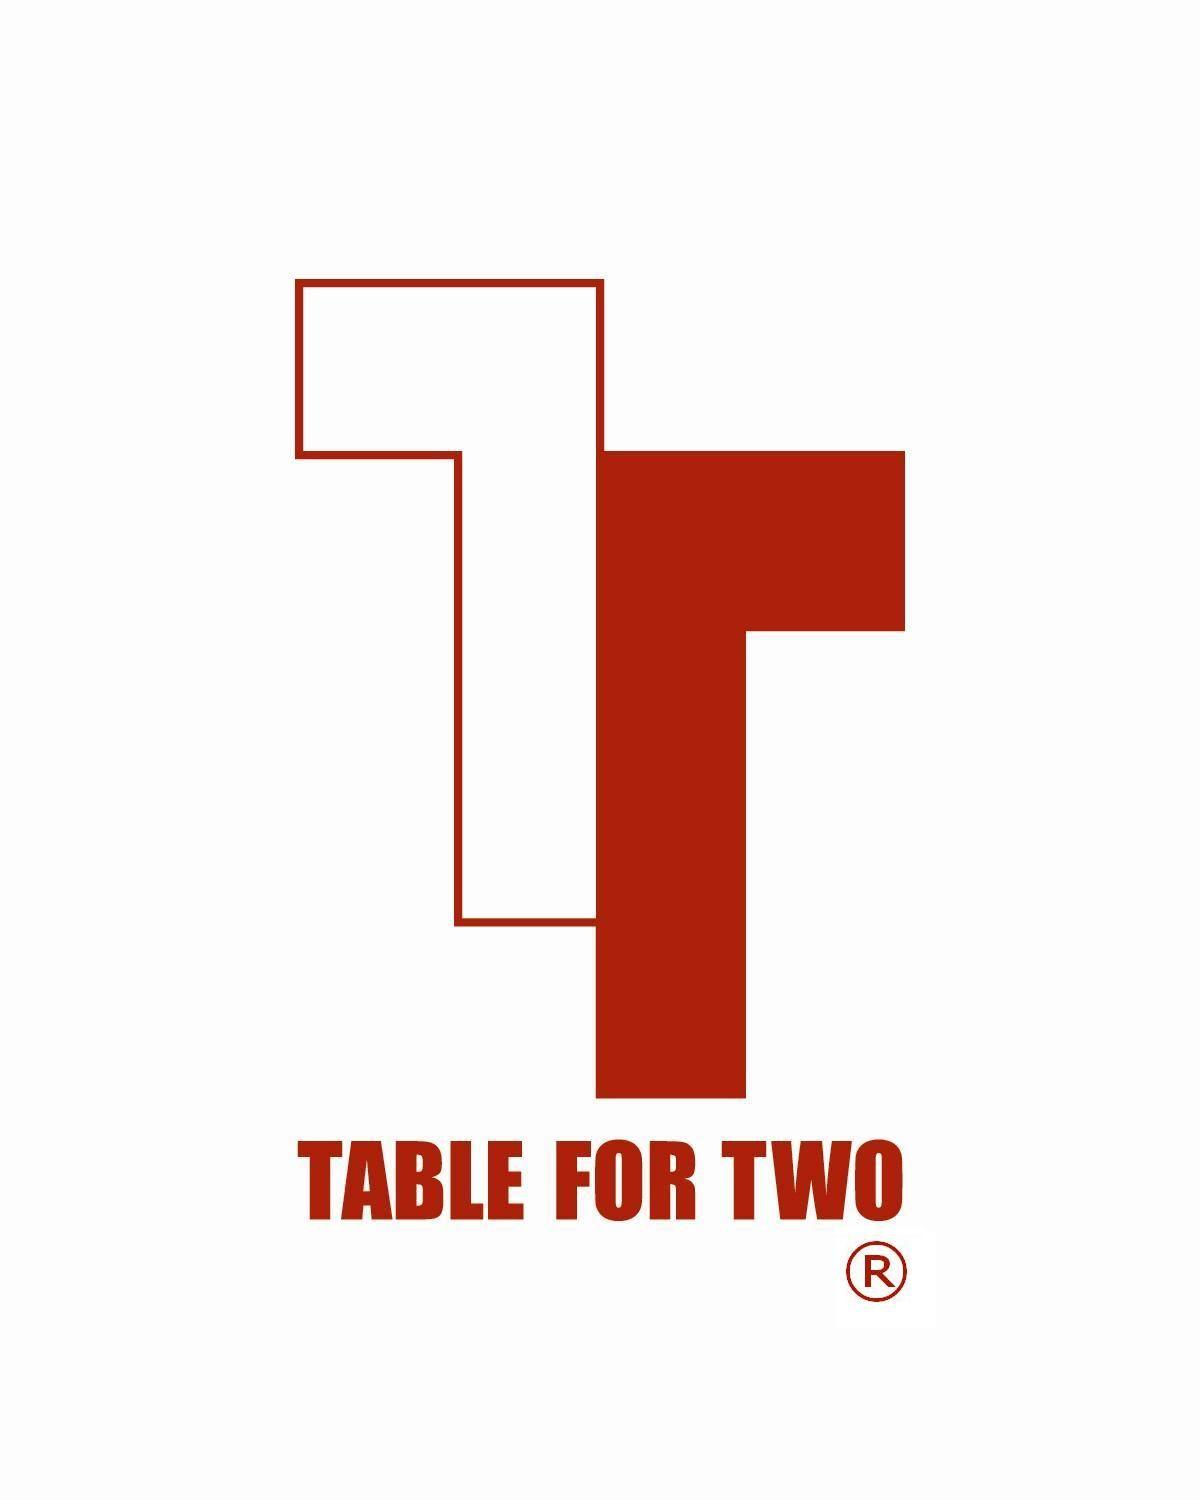 TFT Logo - The Man Behind the Logo – TABLE FOR TWO USA